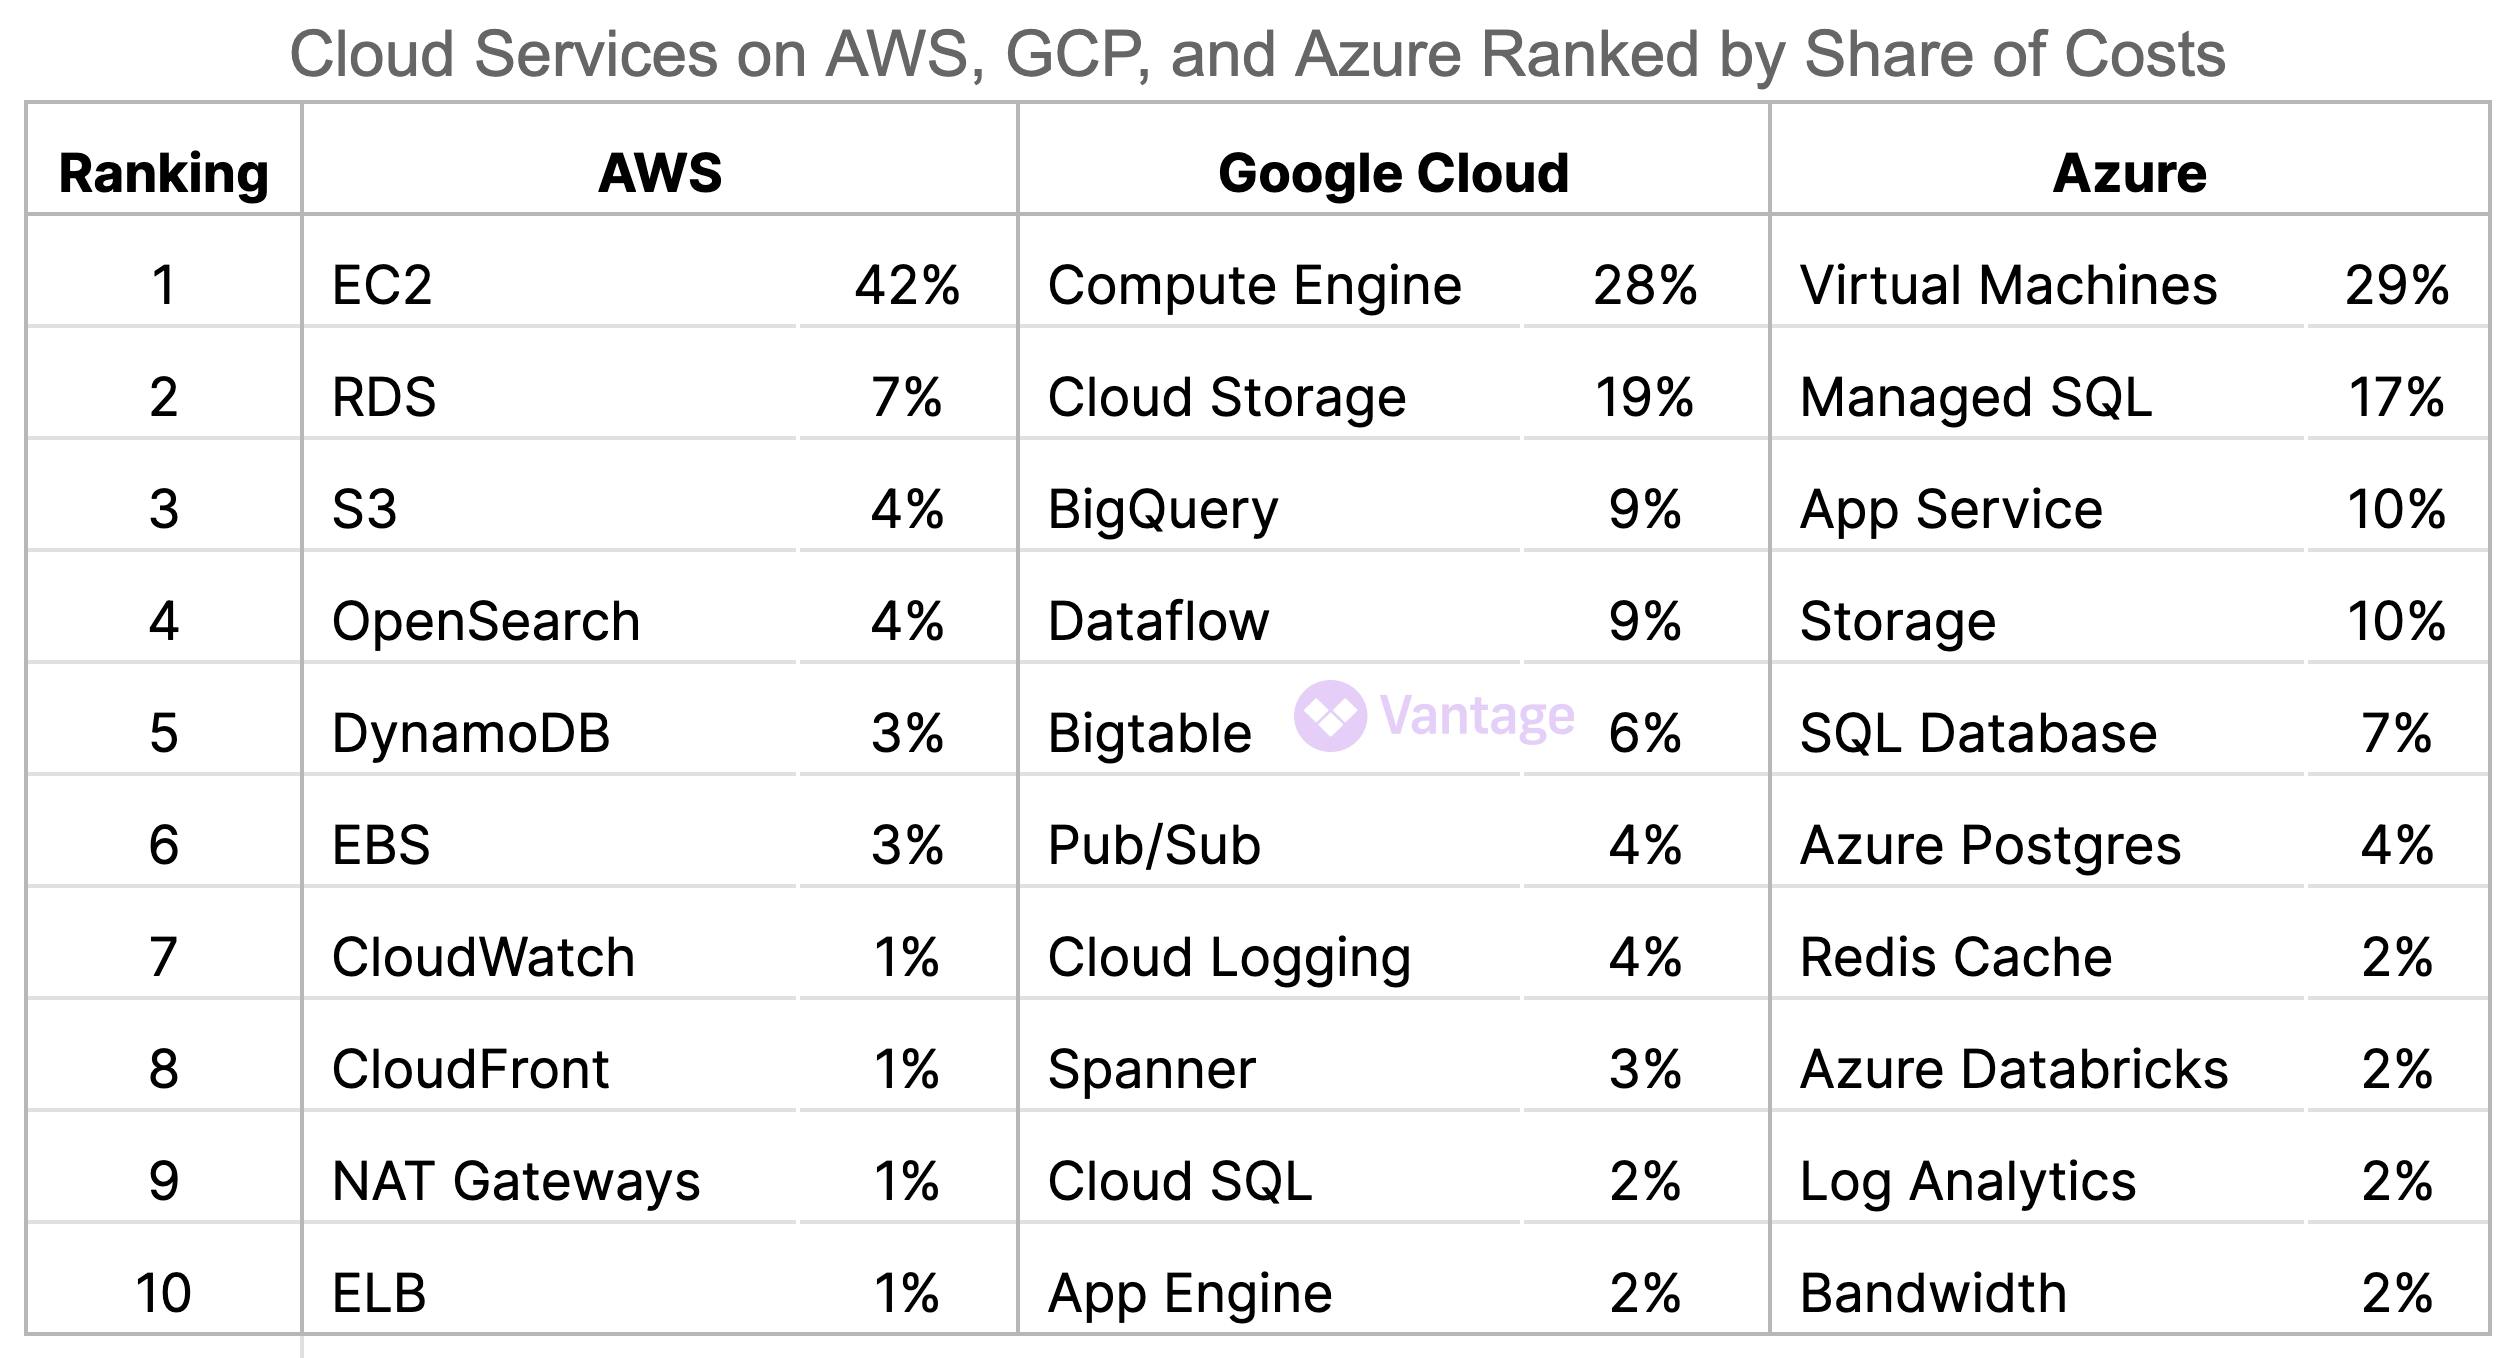 Cloud Services on AWS, GCP, and Azure Ranked by Share of Costss